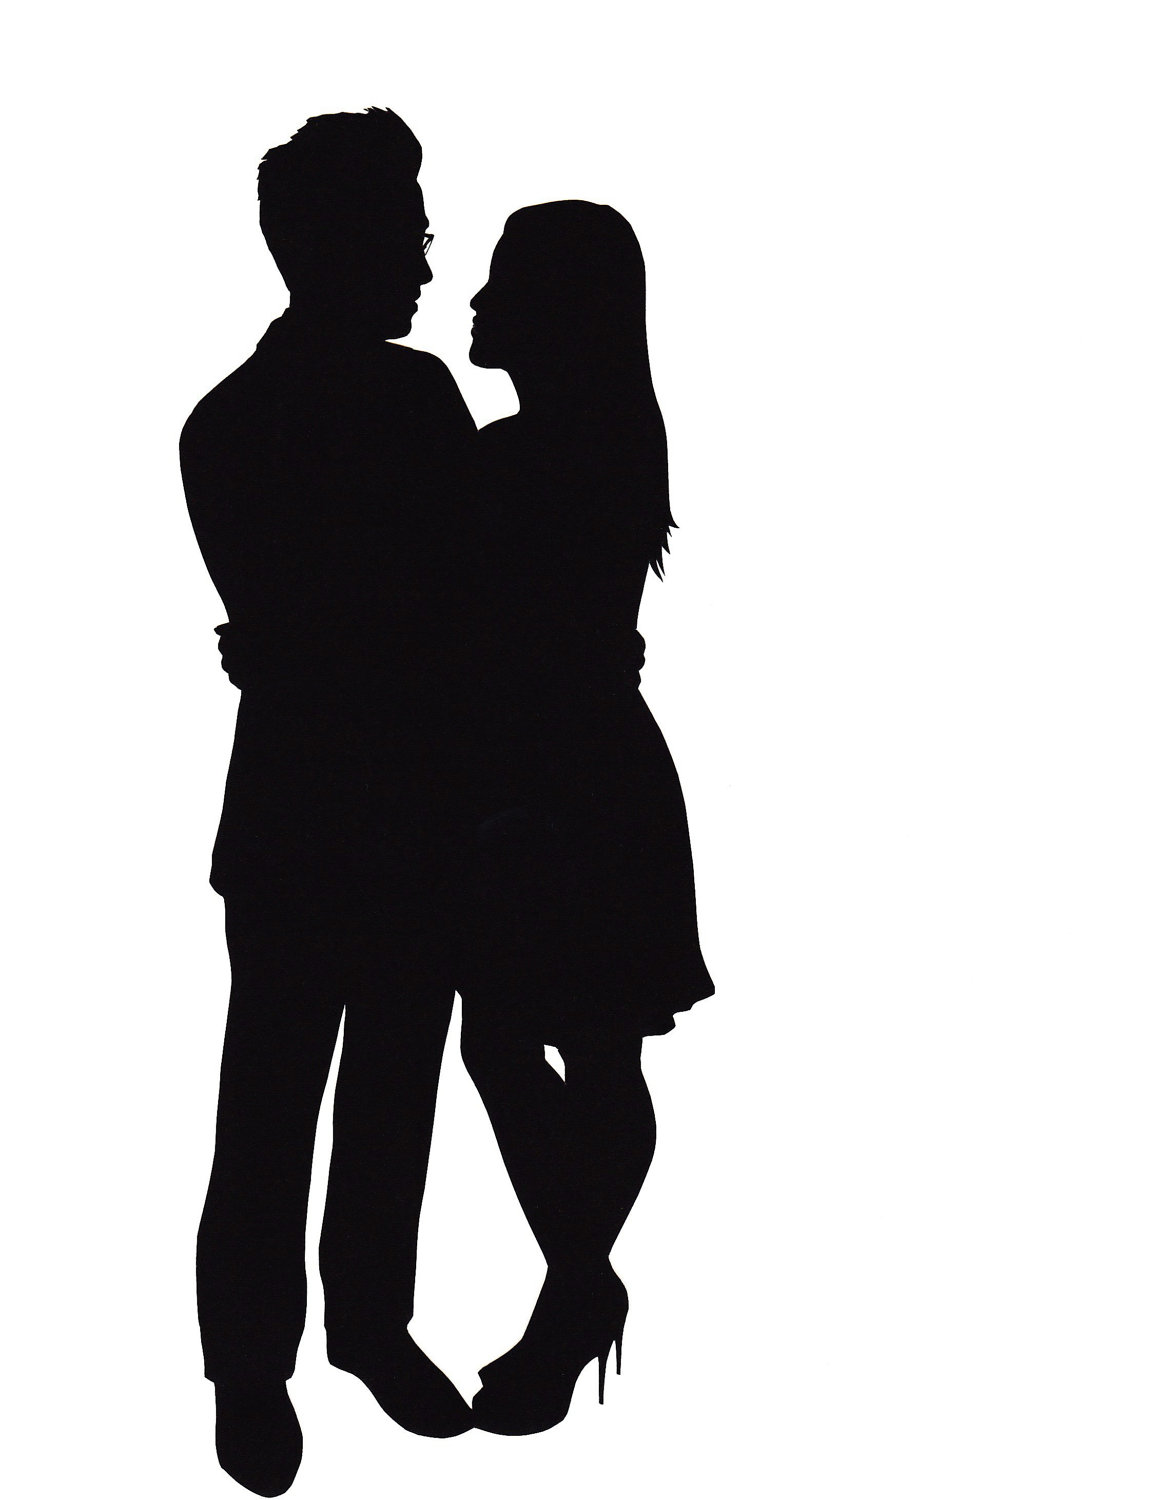 Silhouette Of Two People Kissing - ClipArt Best